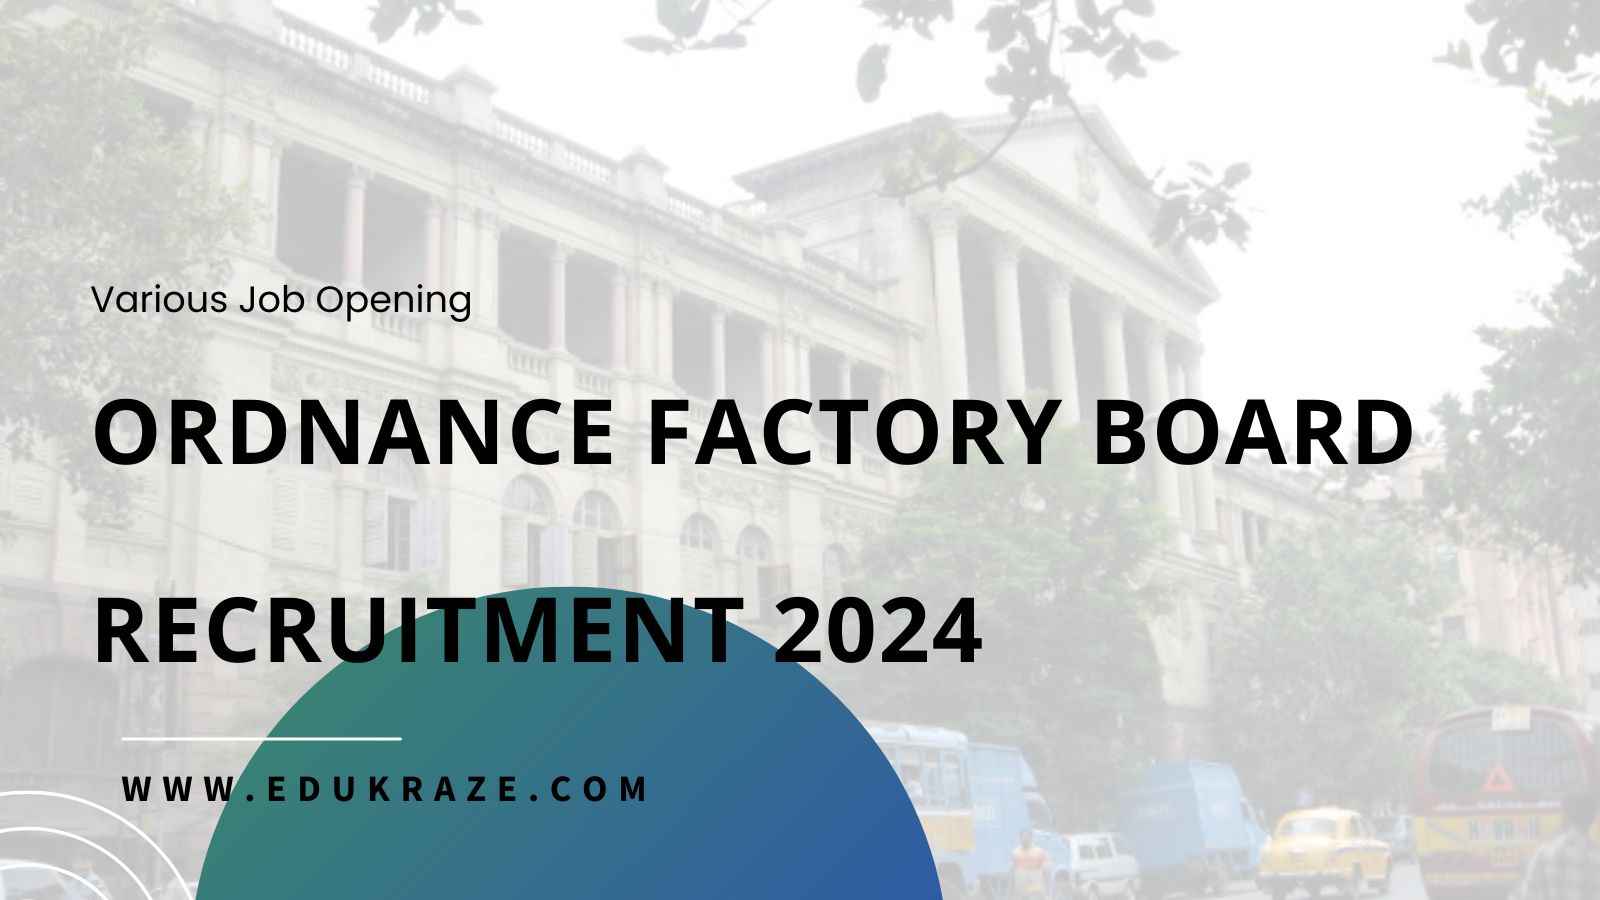 Ordnance Factory Board Recruitment Announced for 140 Posts